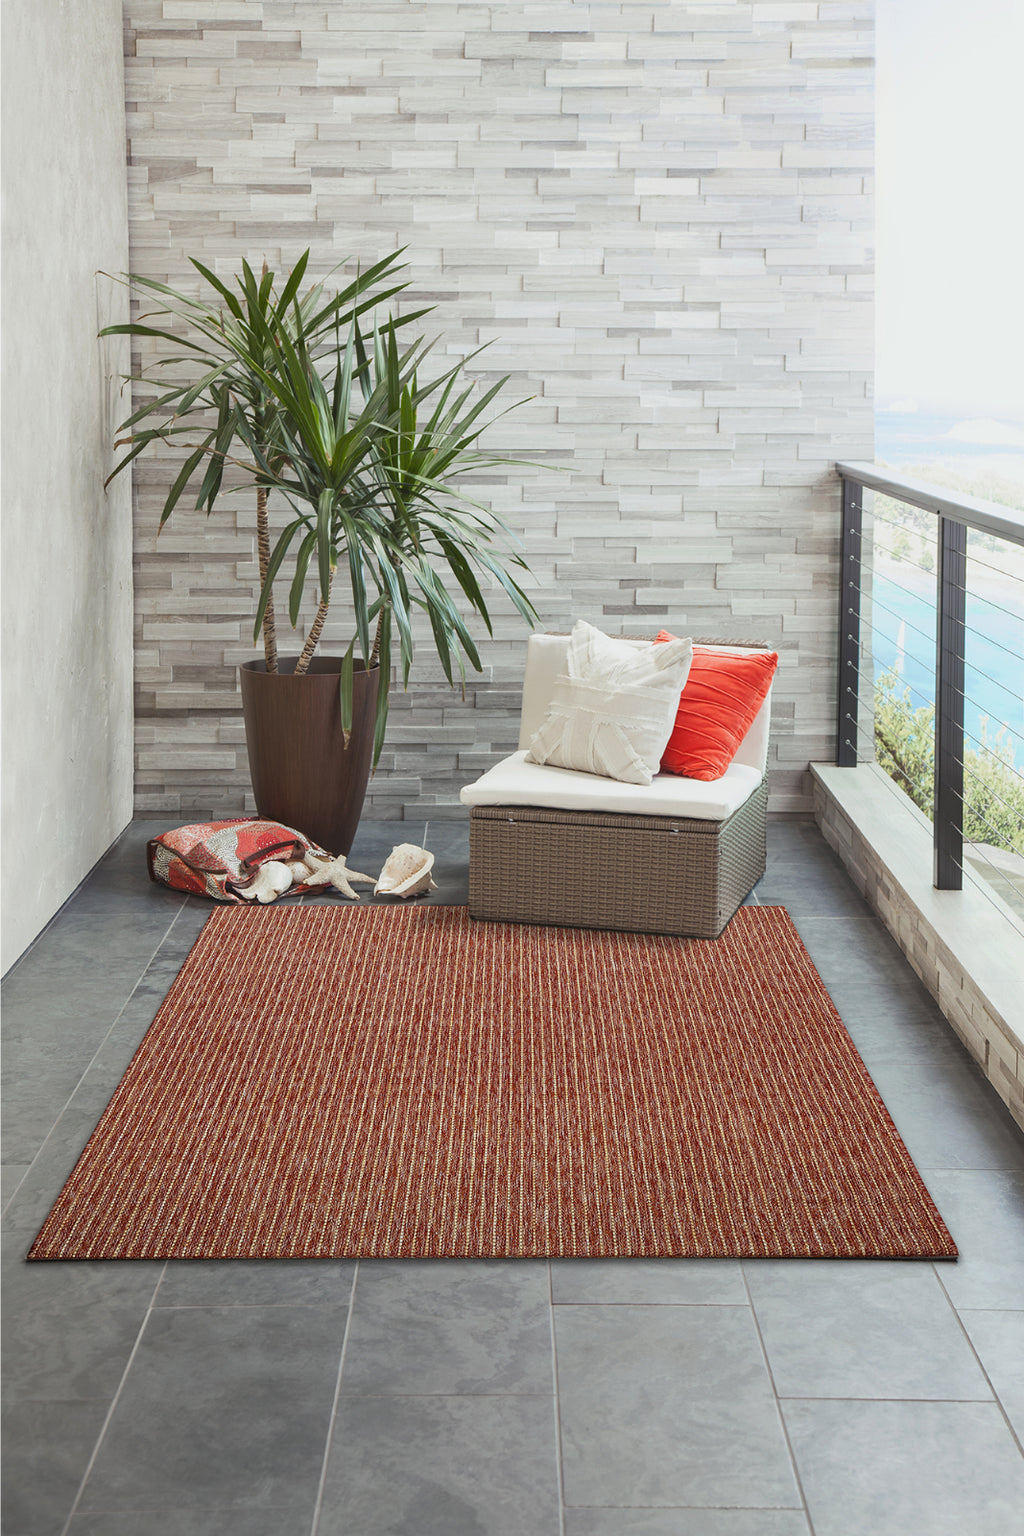 Trans Ocean Carmel 8422/24 Texture Stripe Red Area Rug by Liora Manne Room Scene Image Feature